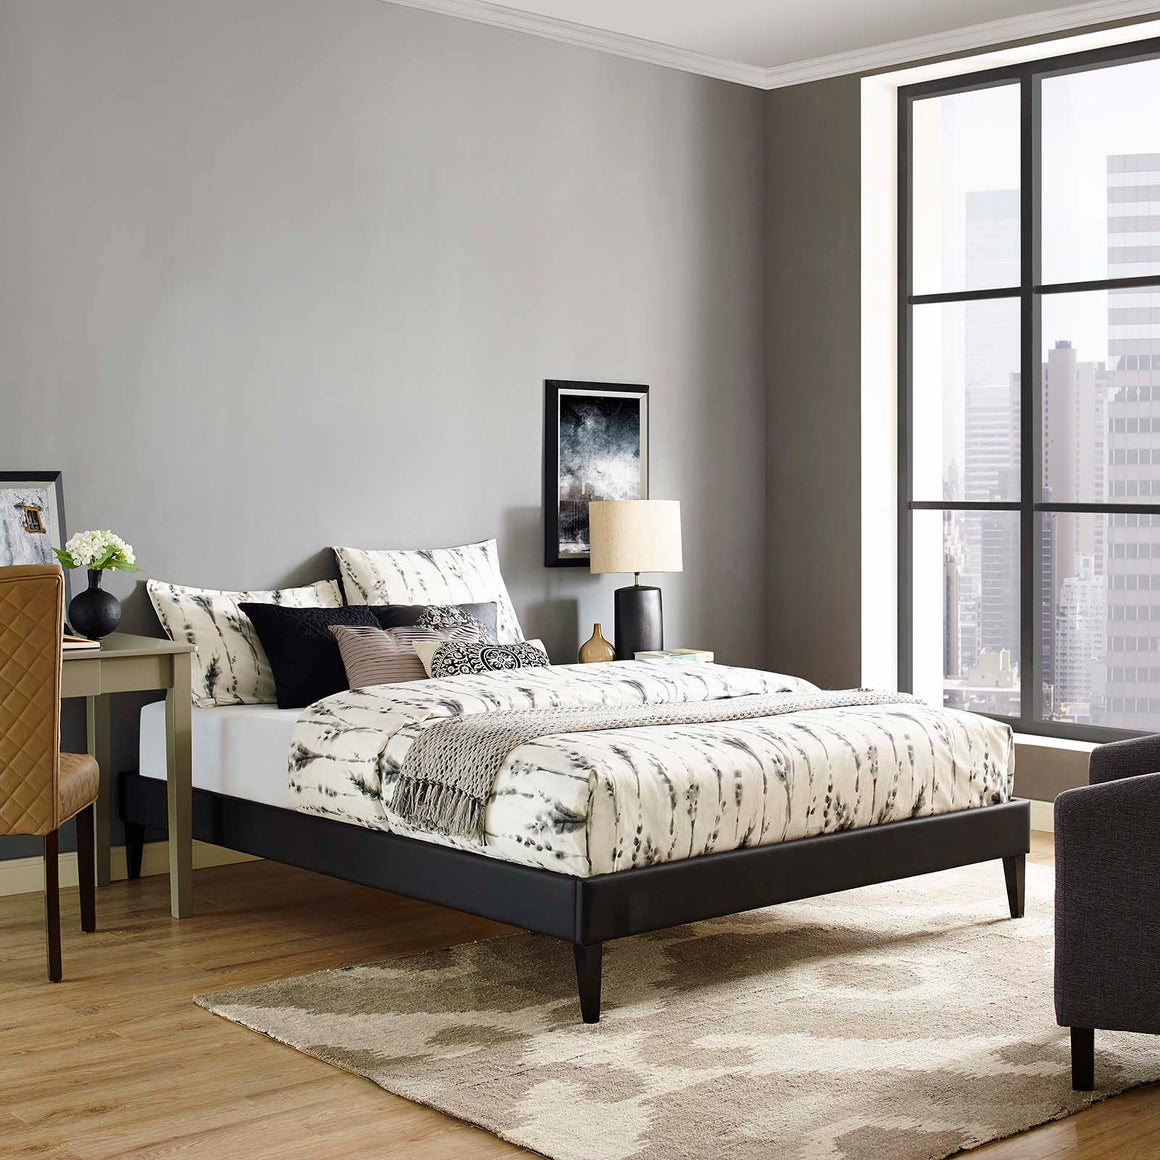 Tessie Vinyl Bed Frame with Squared Tapered Legs